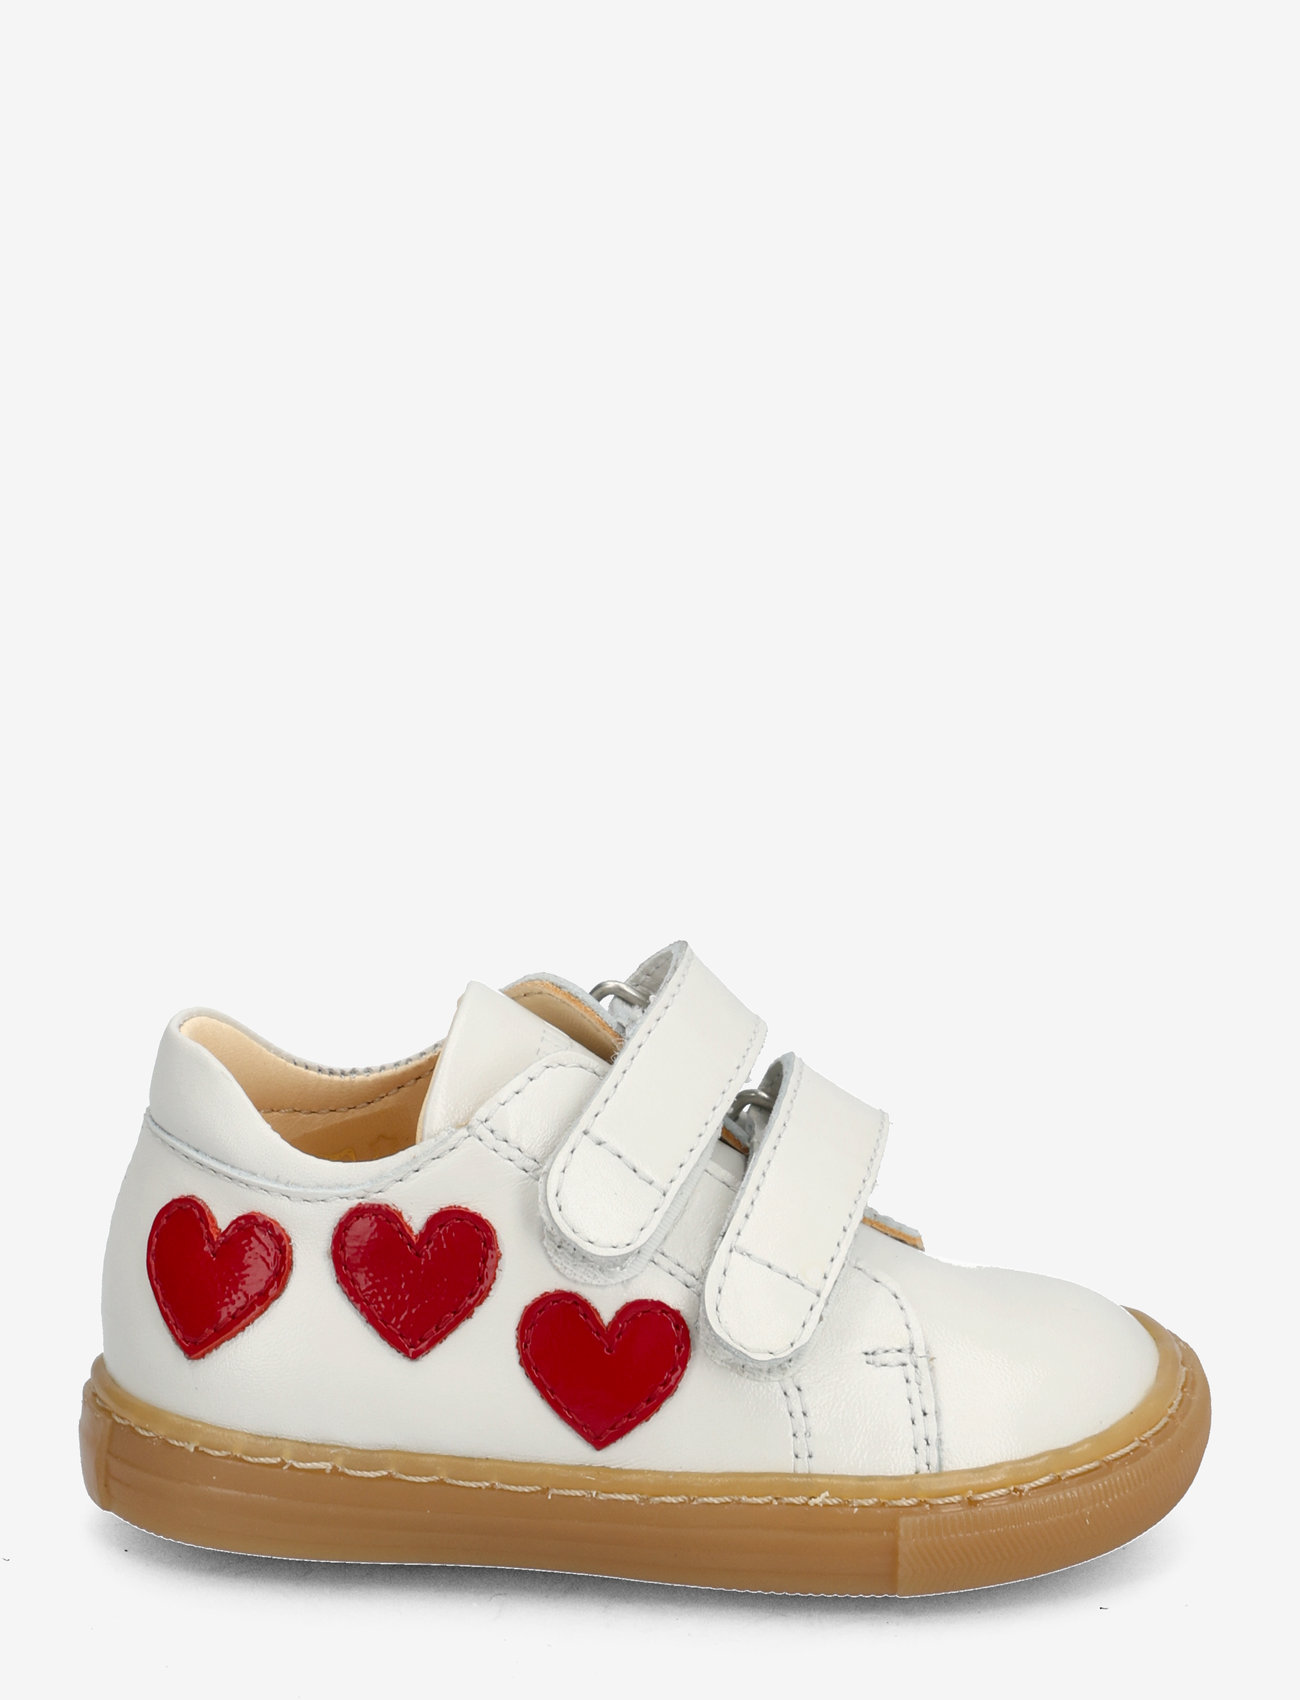 ANGULUS - Shoes - flat - with velcro - sommerkupp - 1493/a003 off white/hearts - 1